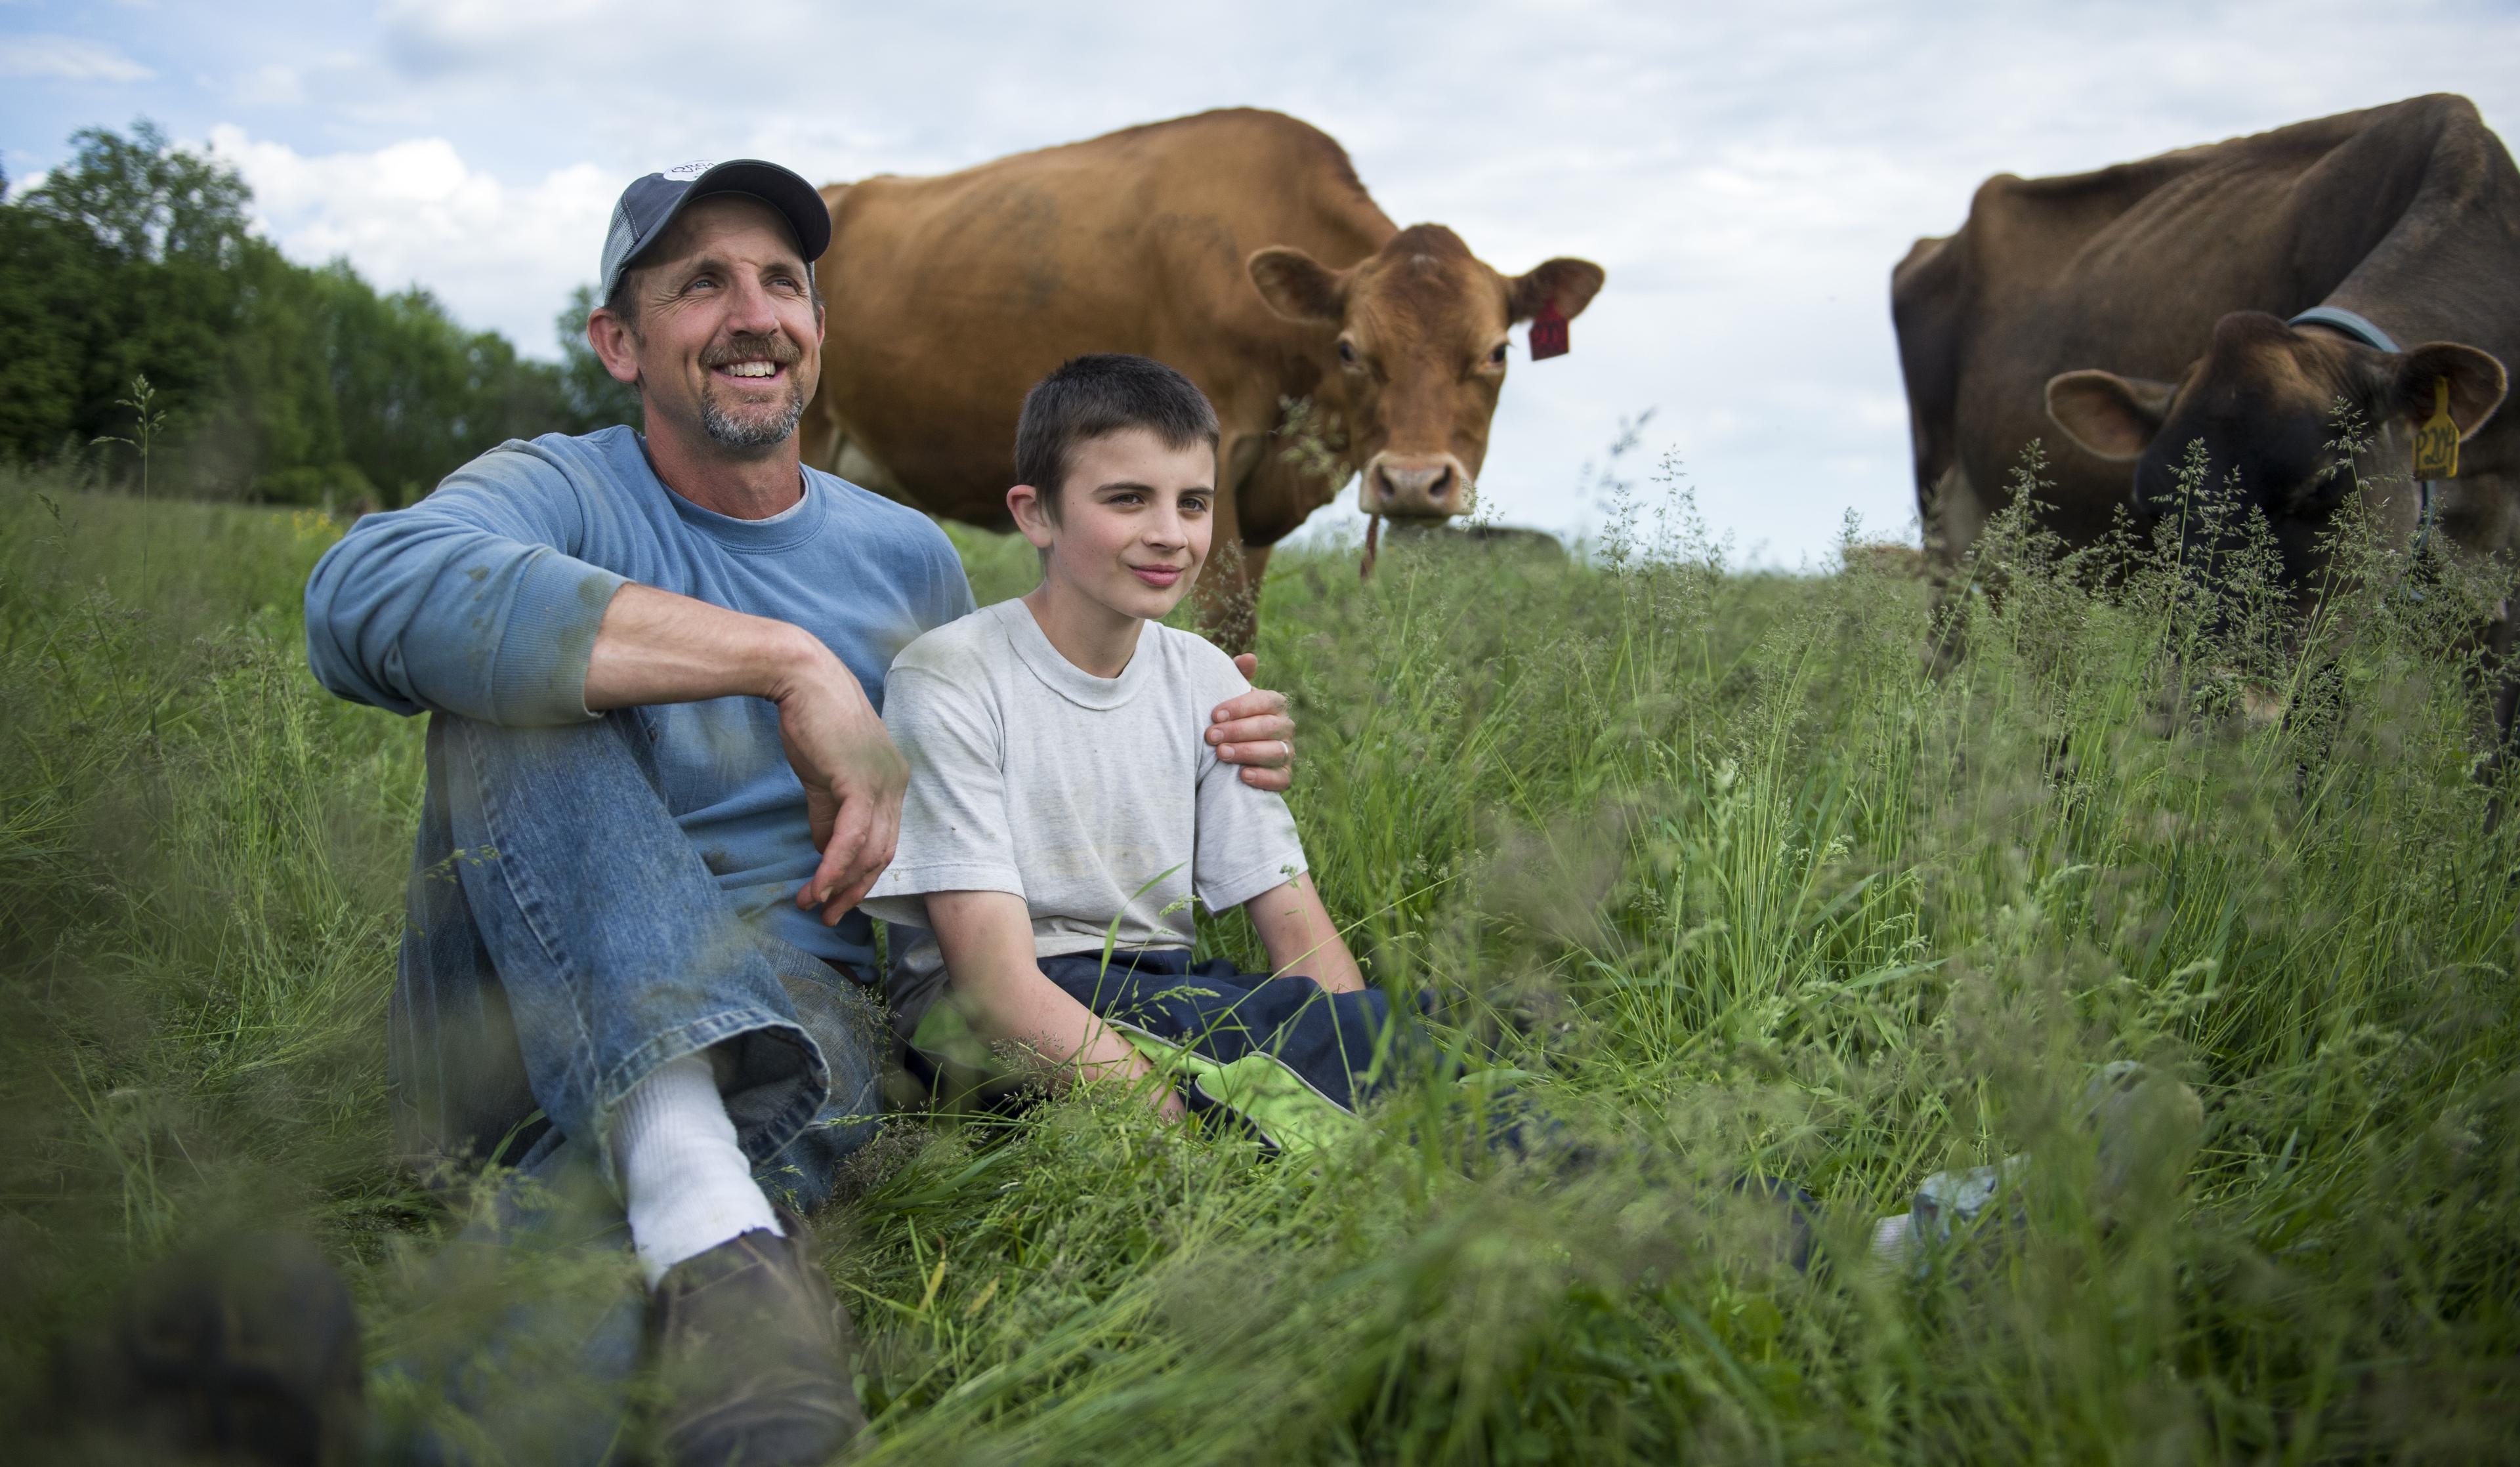 A father and son sit in organic pasture as cows look on.